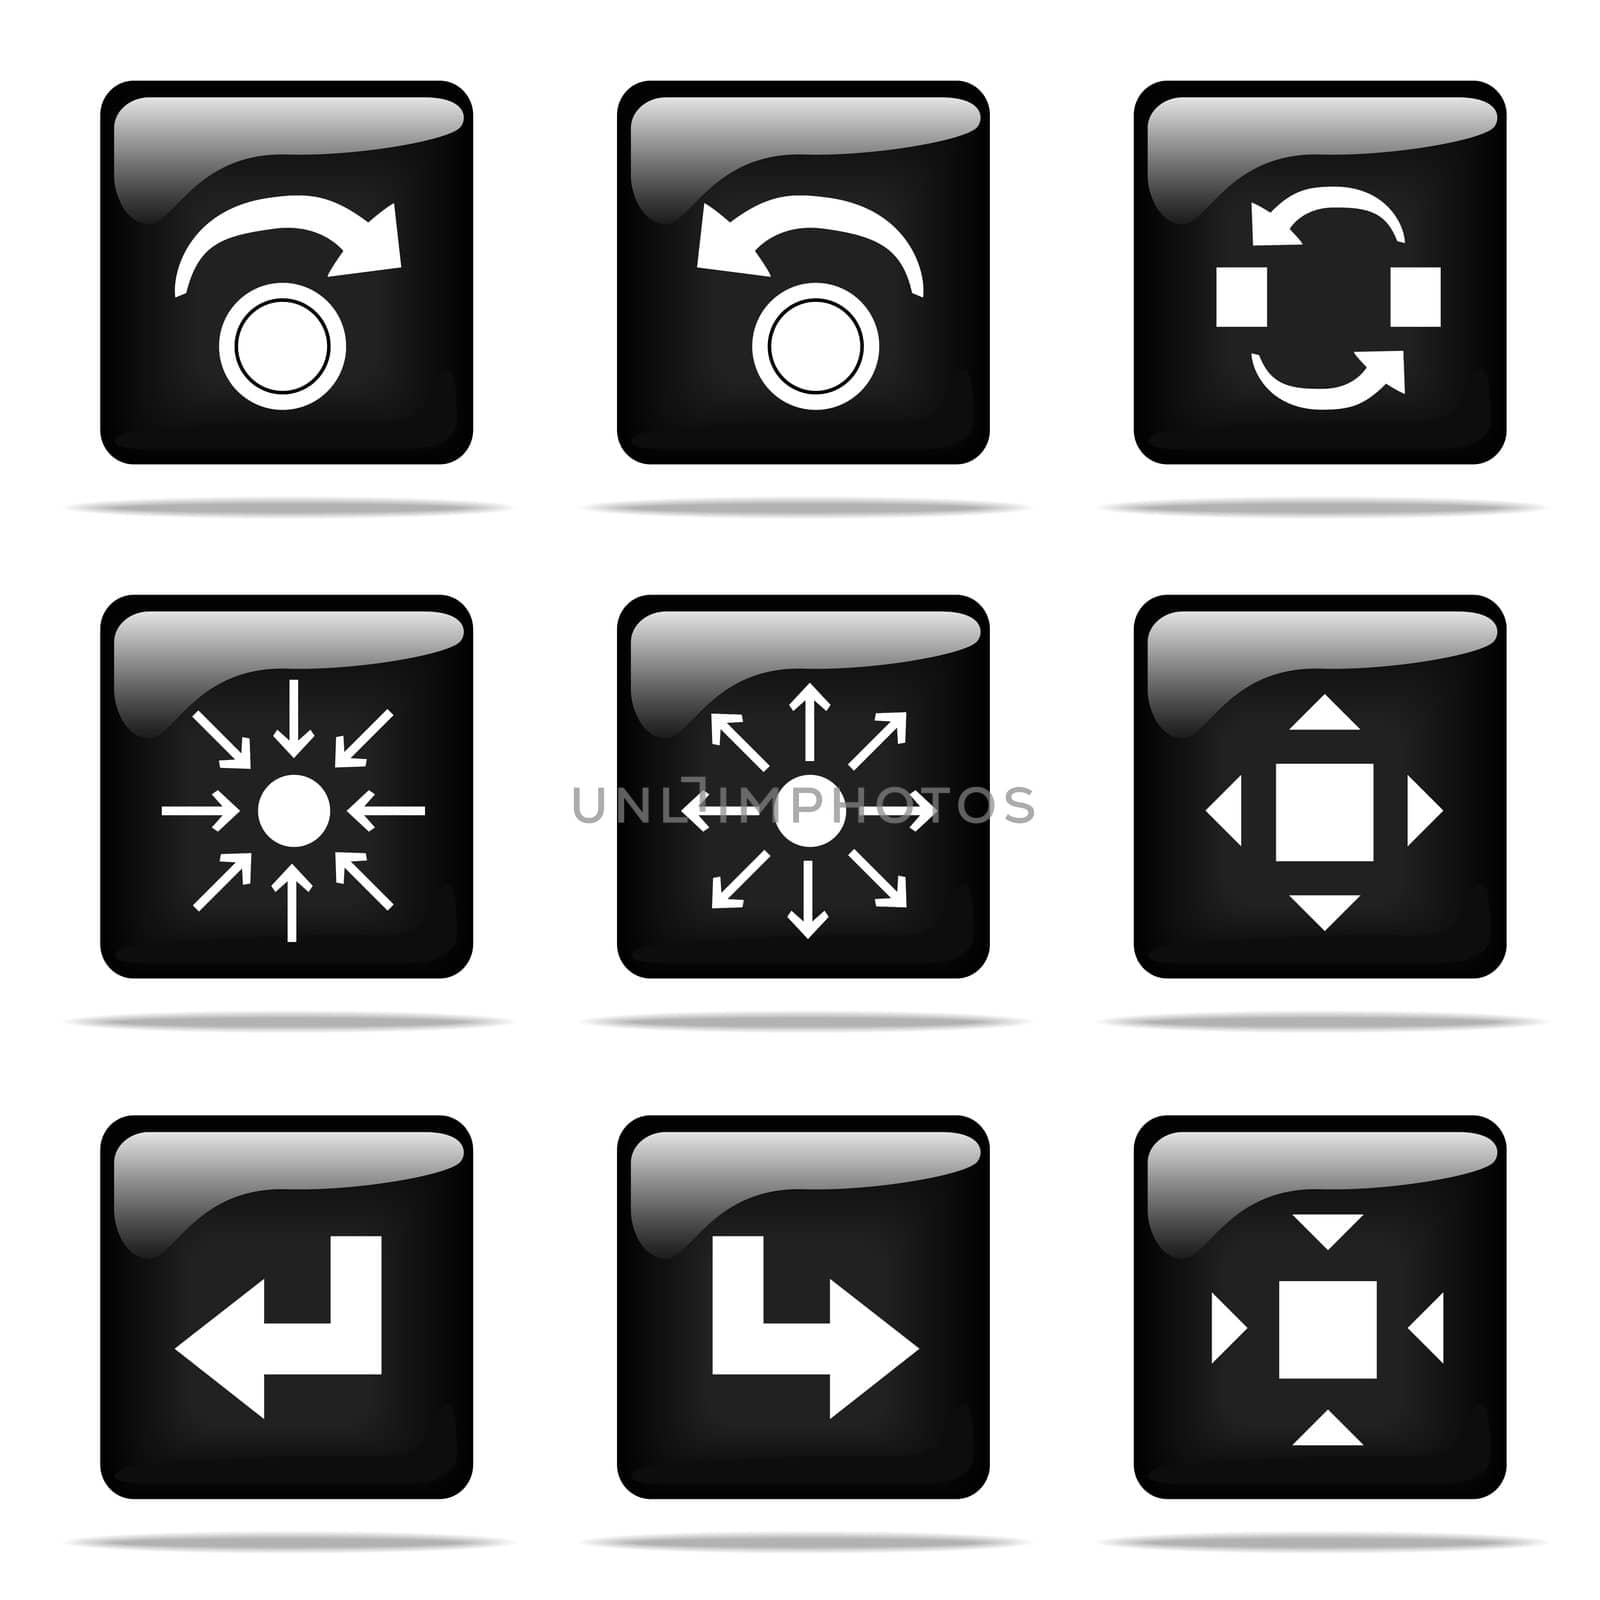 Set of glossy buttons with icons by skvoor